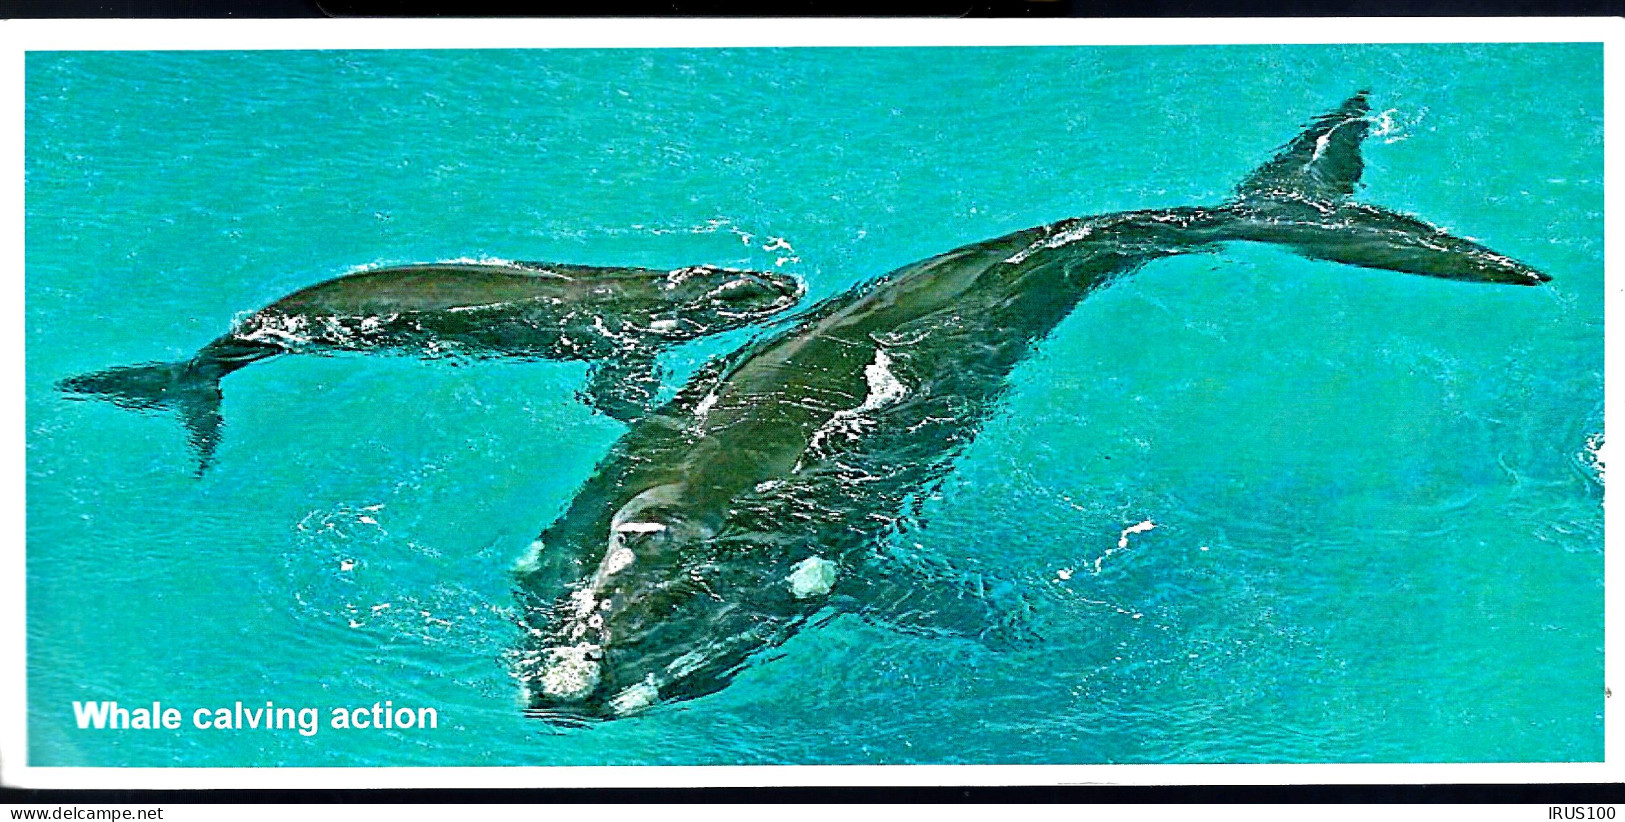 BALEINES - ROSS DEPENDENCY - THE COLDEST PLACE ON EARTH - WHALE COLVING ACTION - Ballenas